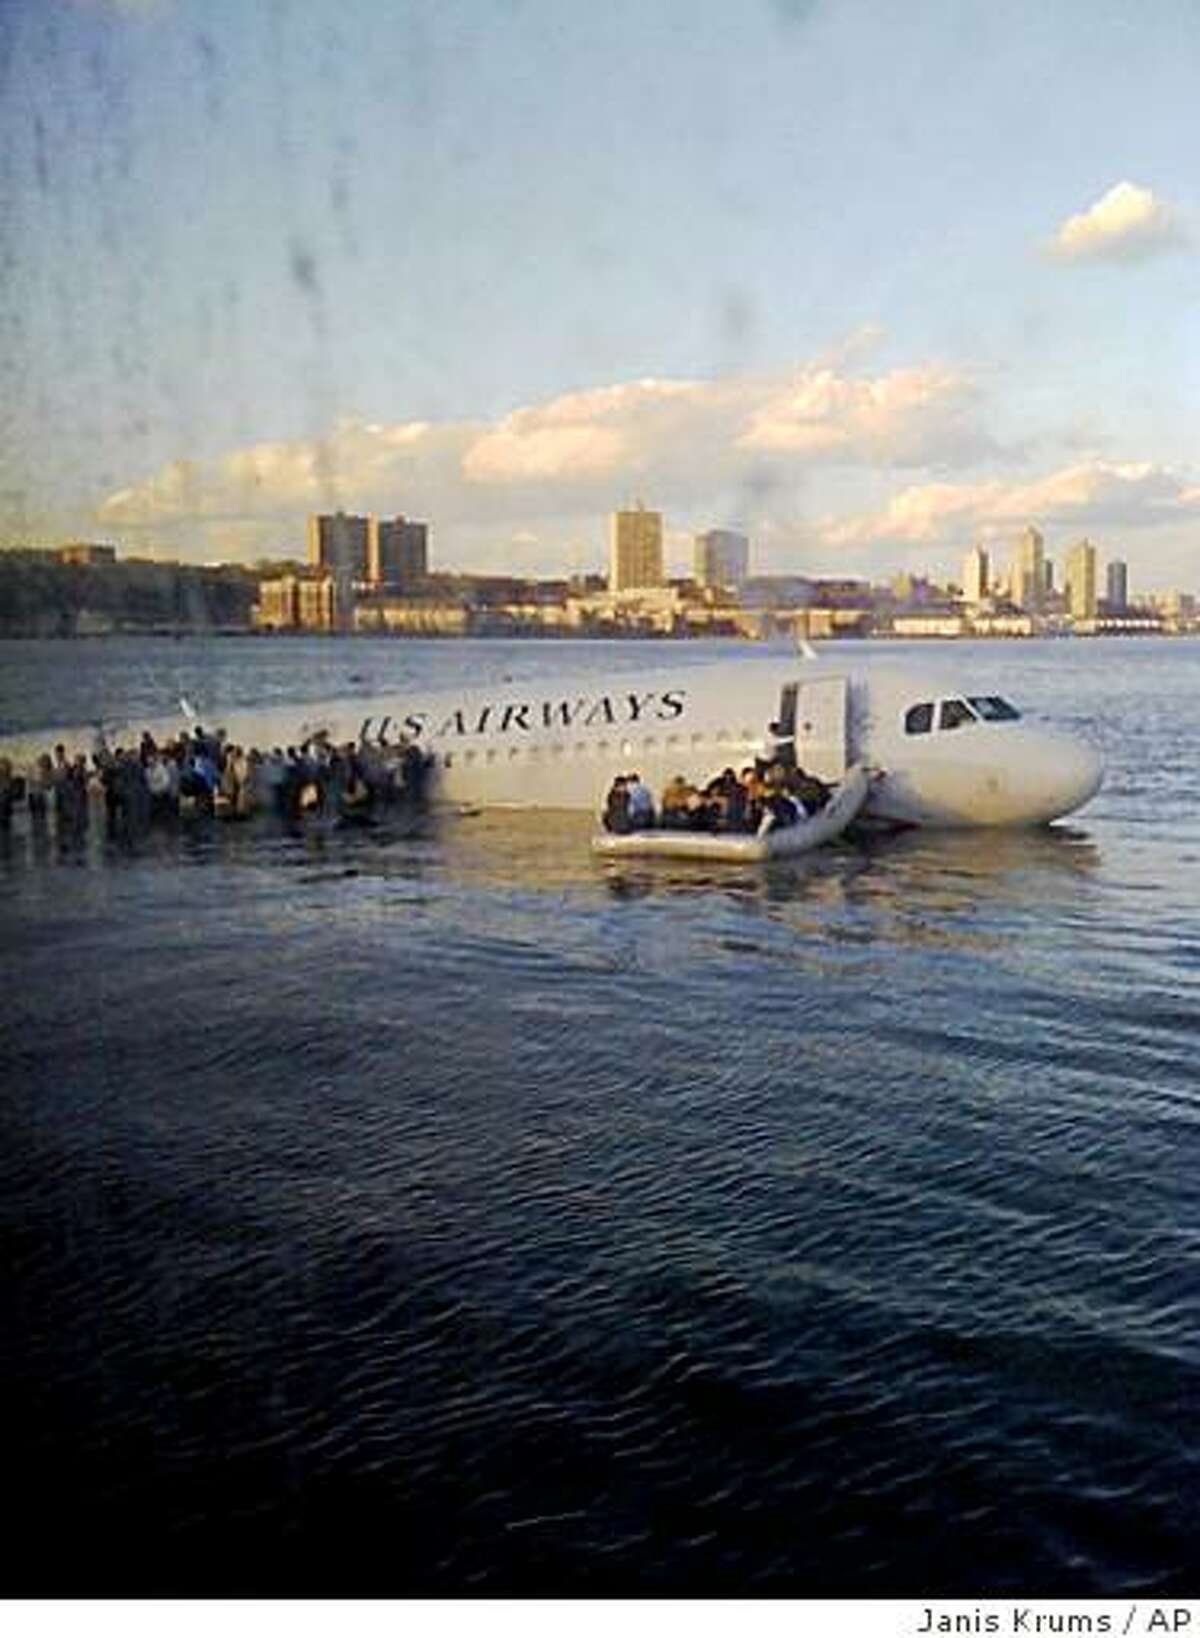 In this photo taken by a passenger on a ferry, airline passengers egress a US Airways Airbus 320 jetliner that safely ditched in the frigid waters of the Hudson River in New York, Thursday Jan. 15, 2009 after a flock of birds knocked out both its engines. All 155 people on board survived. (AP Photo/Janis Krums)